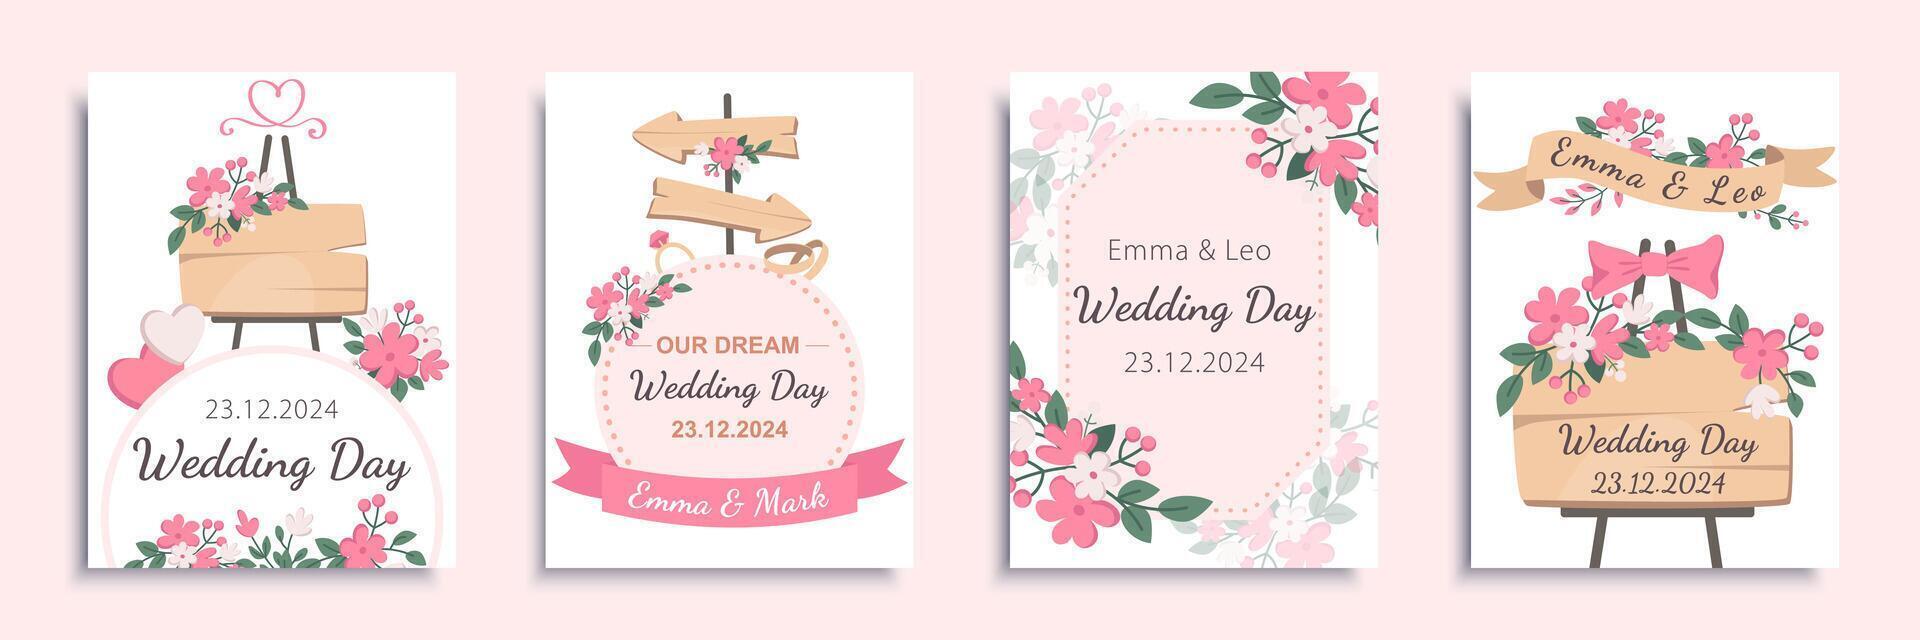 Wedding day cover brochure set in flat design. Poster templates with invitation cards with elegant wooden boards with ceremony date, flower bouquets, pink hearts, ribbon frames. Vector illustration